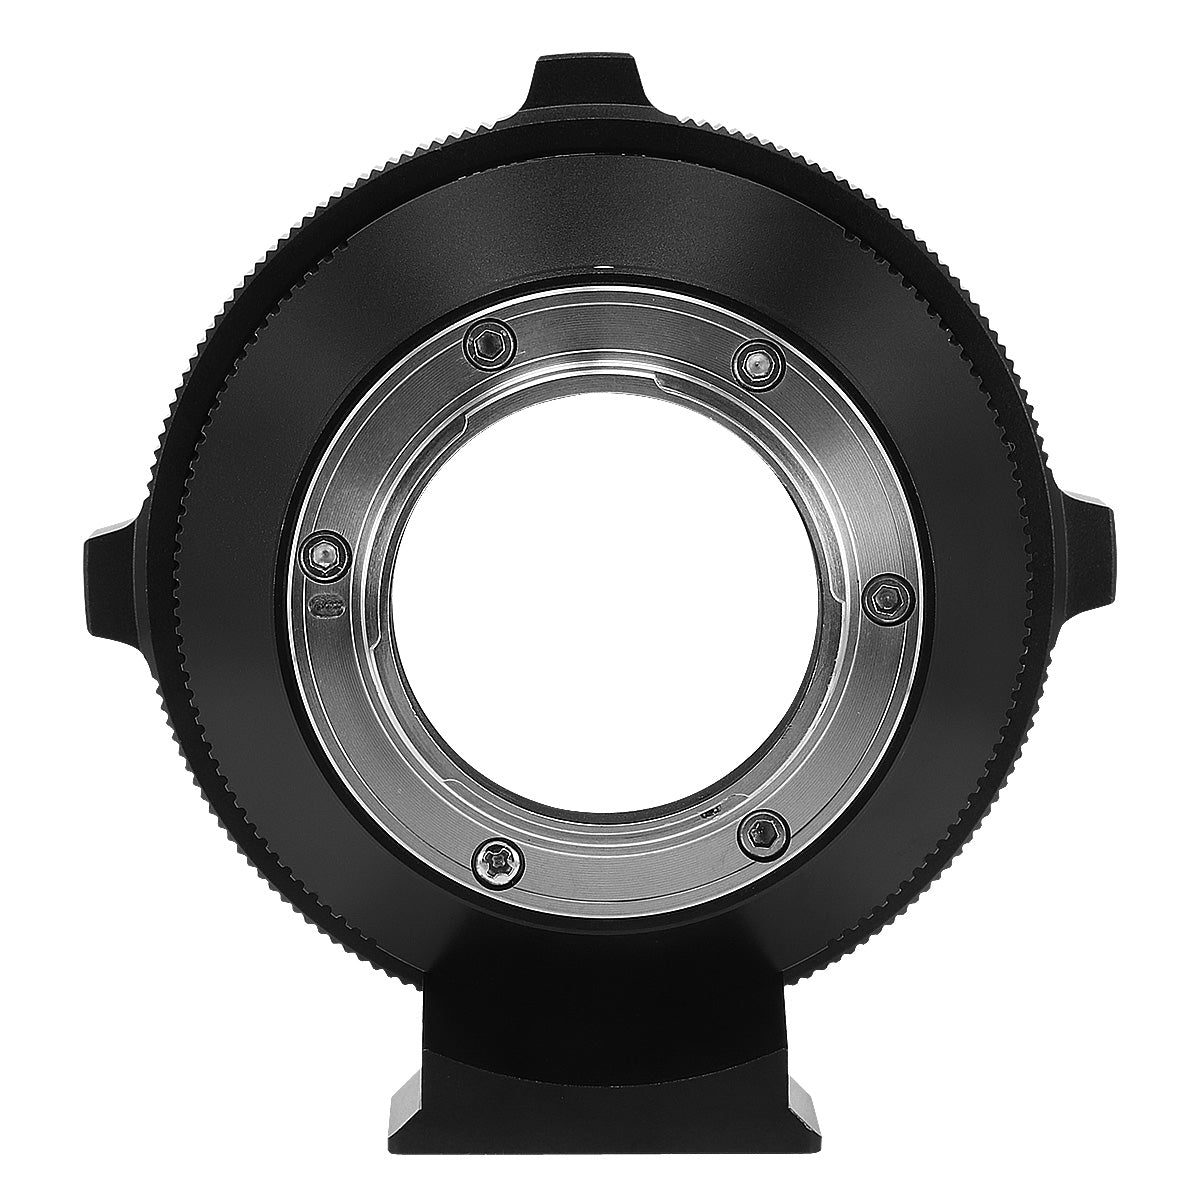 Adapter for Arri PL Mount Lens to Olympus GH5S BMPCC MFT M4/3 M43 Camera